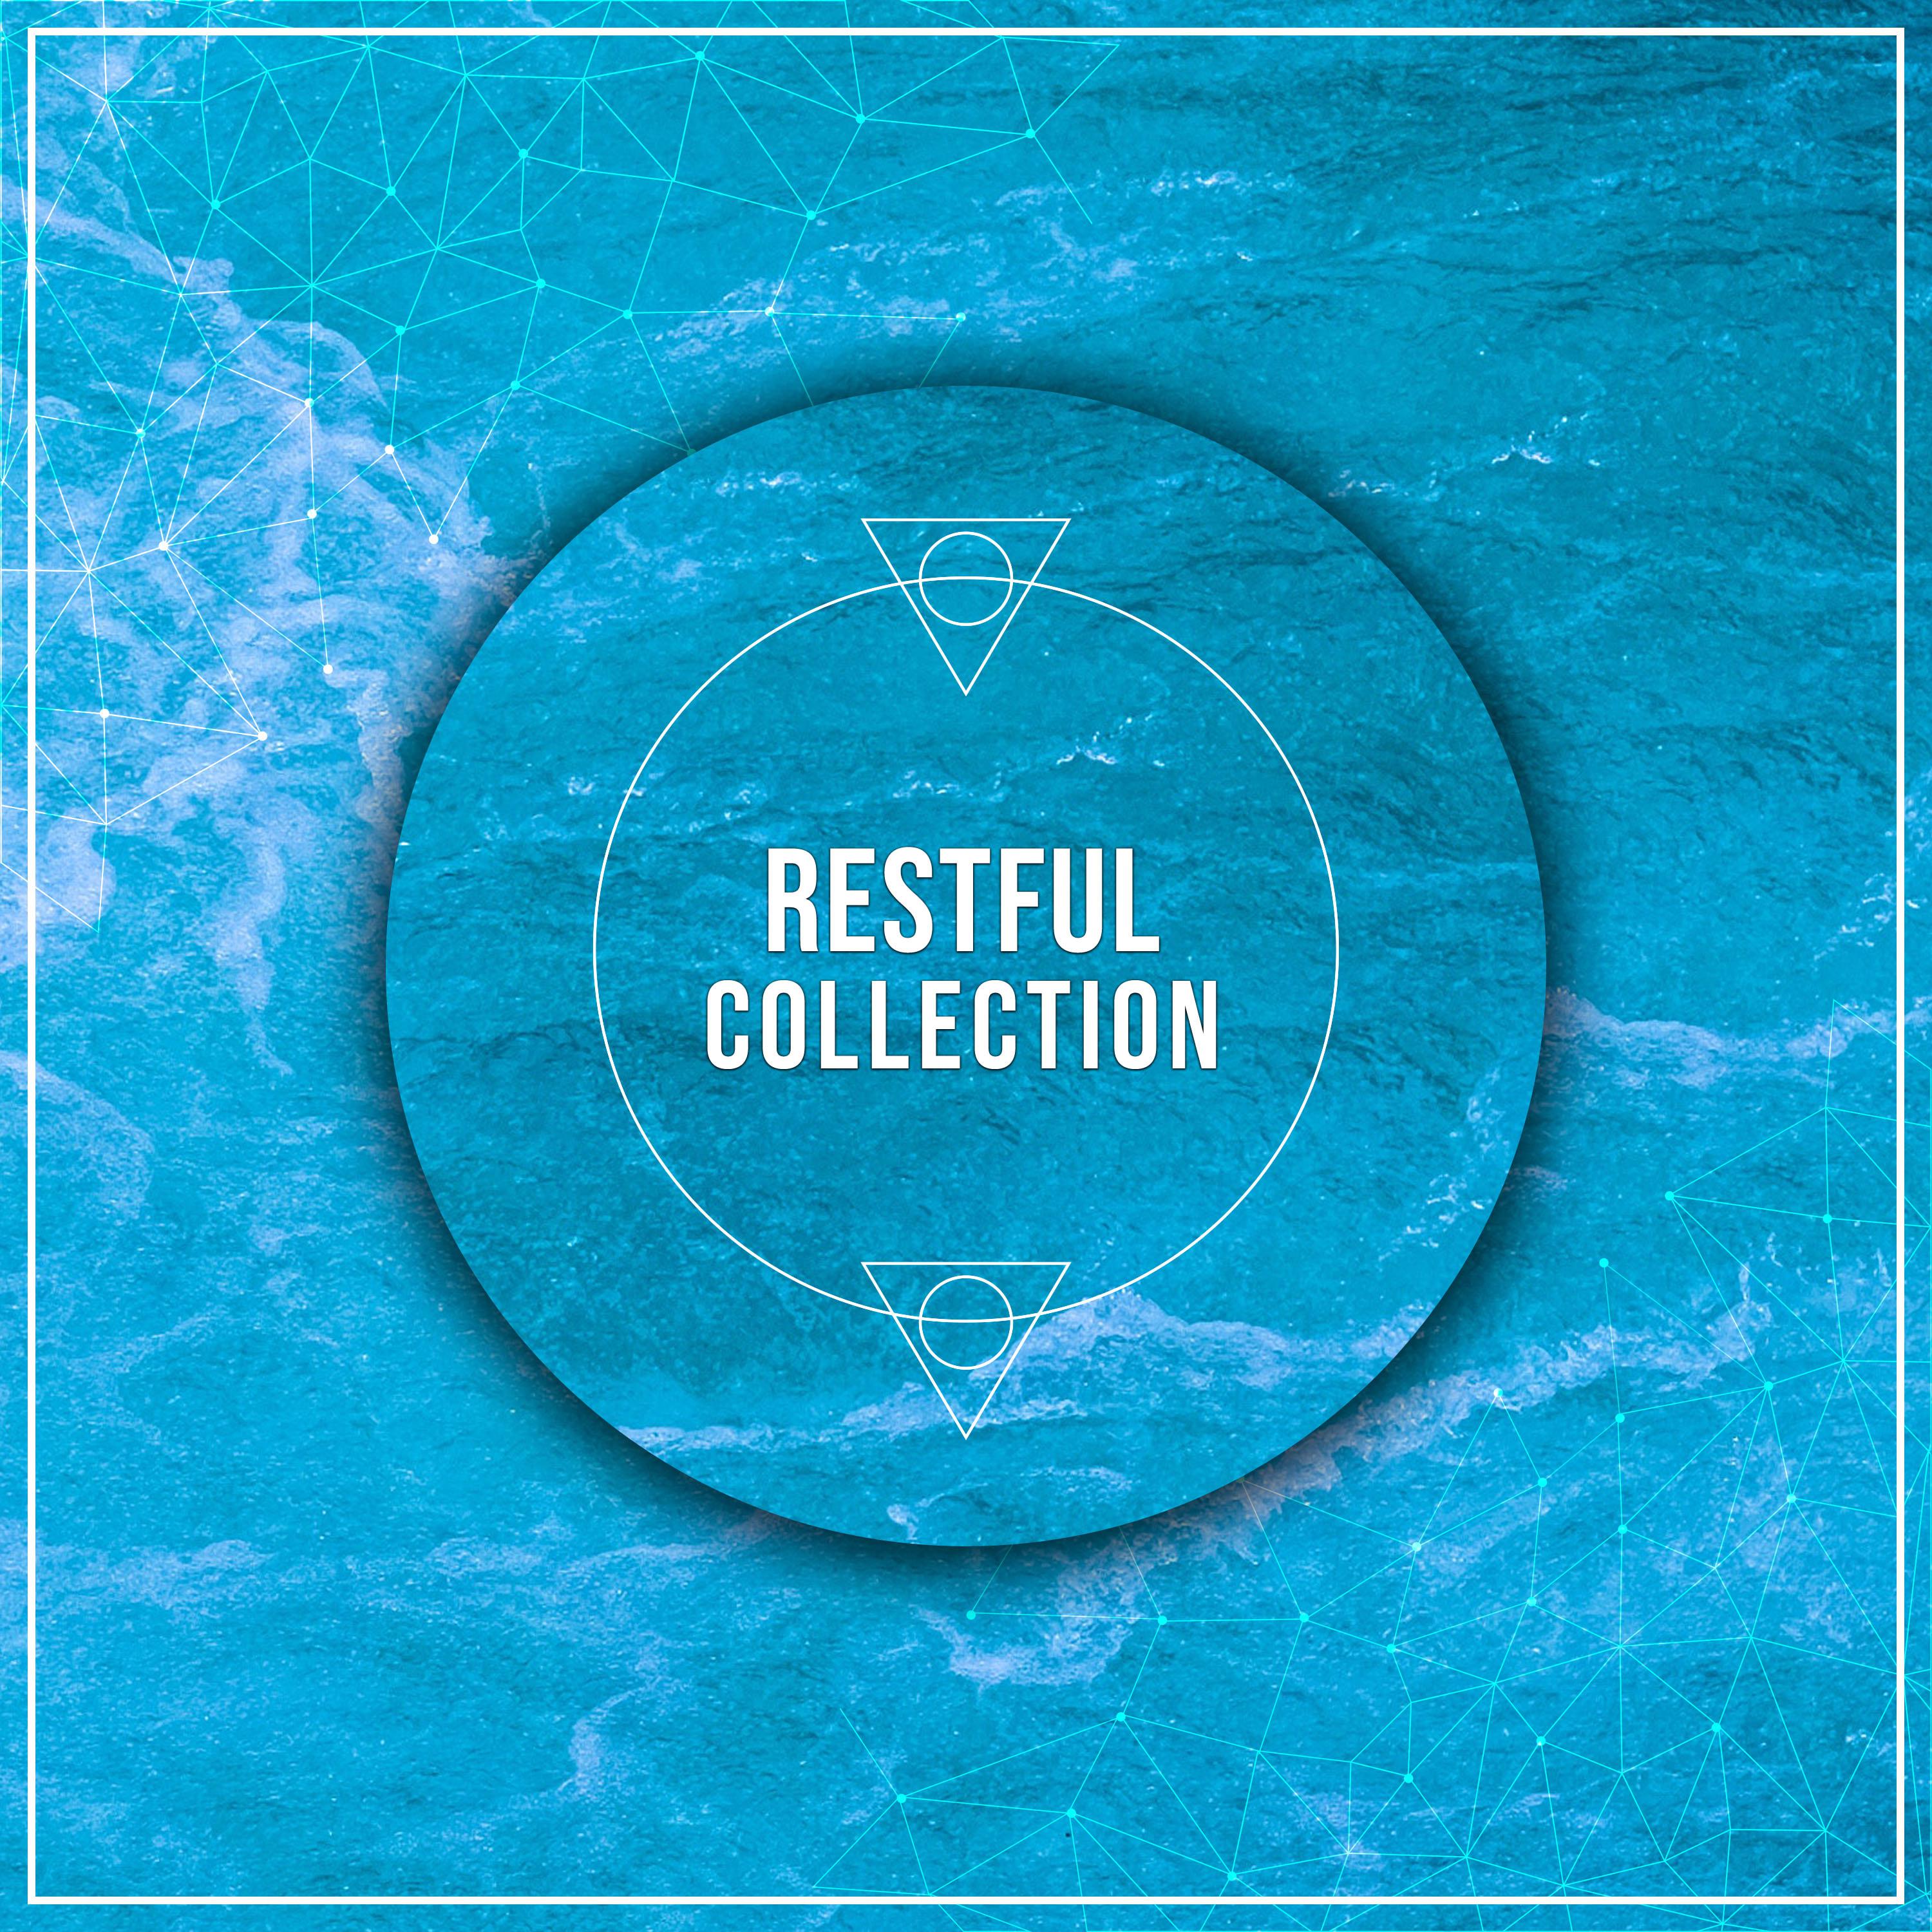 #18 Restful Collection for Reiki & Relaxation